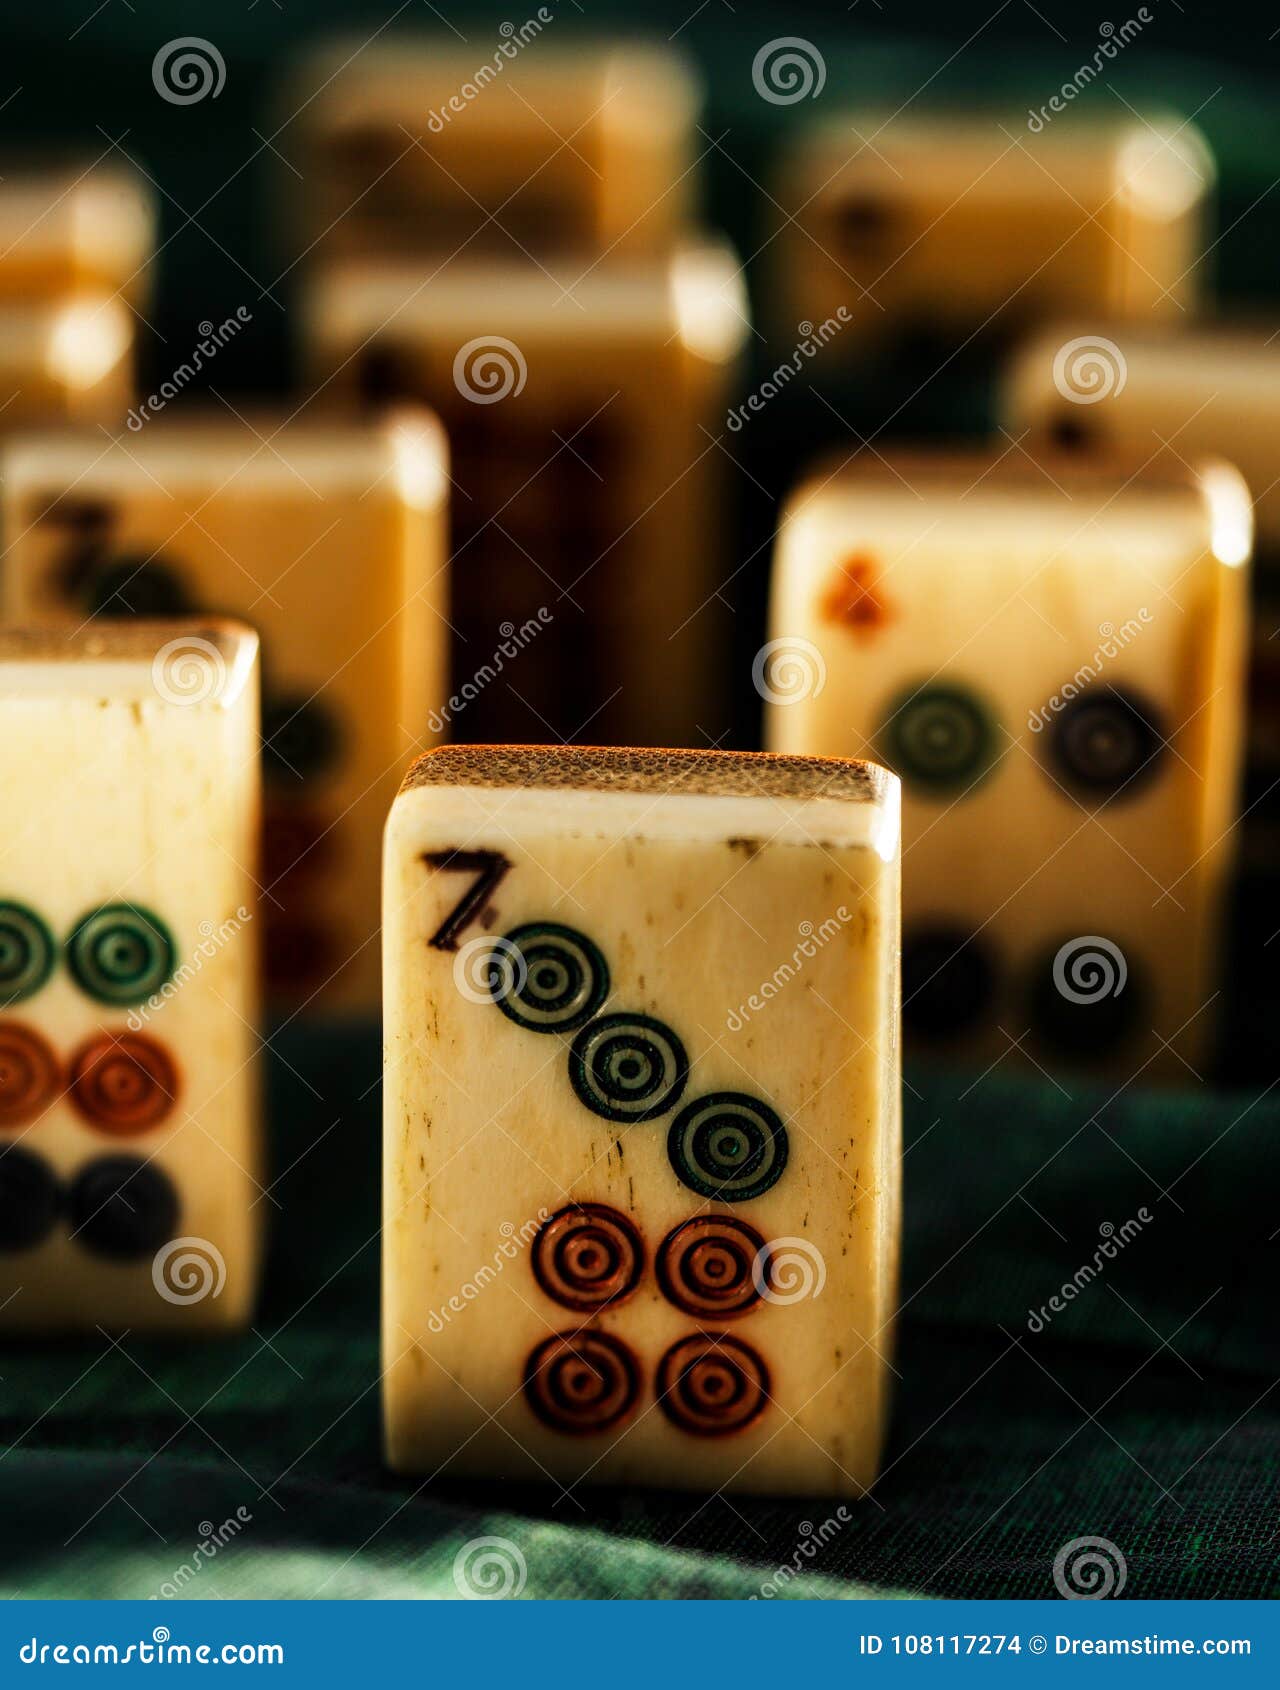 An Antique Mahjong Set on Display Stock Photo - Image of surface, board:  108117274